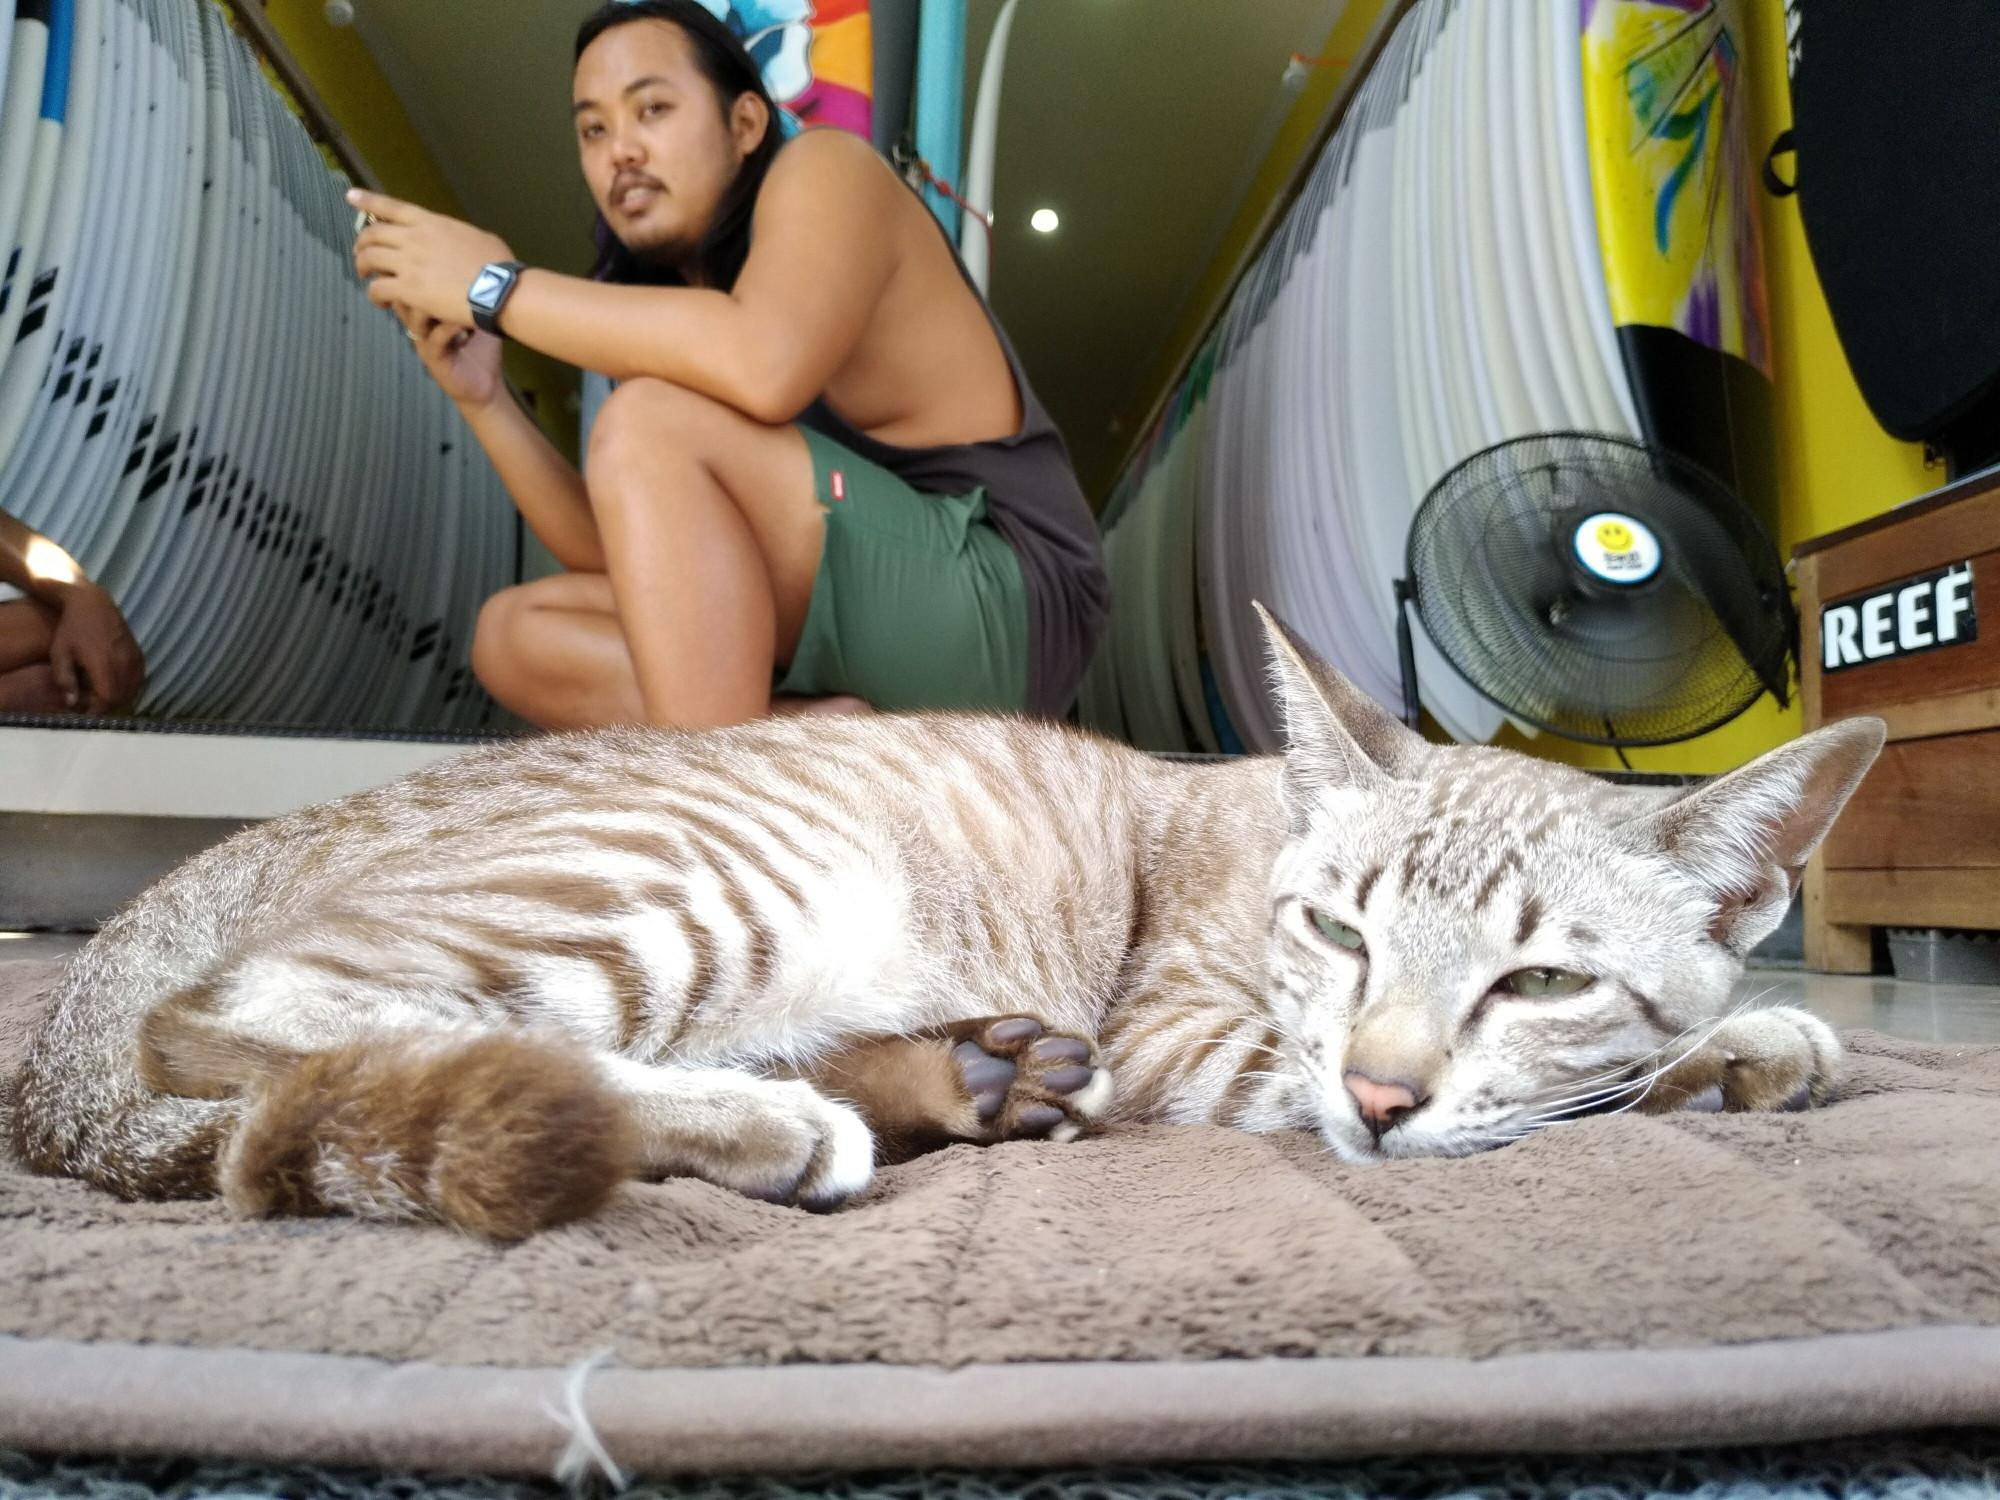 Life of cat from Bali